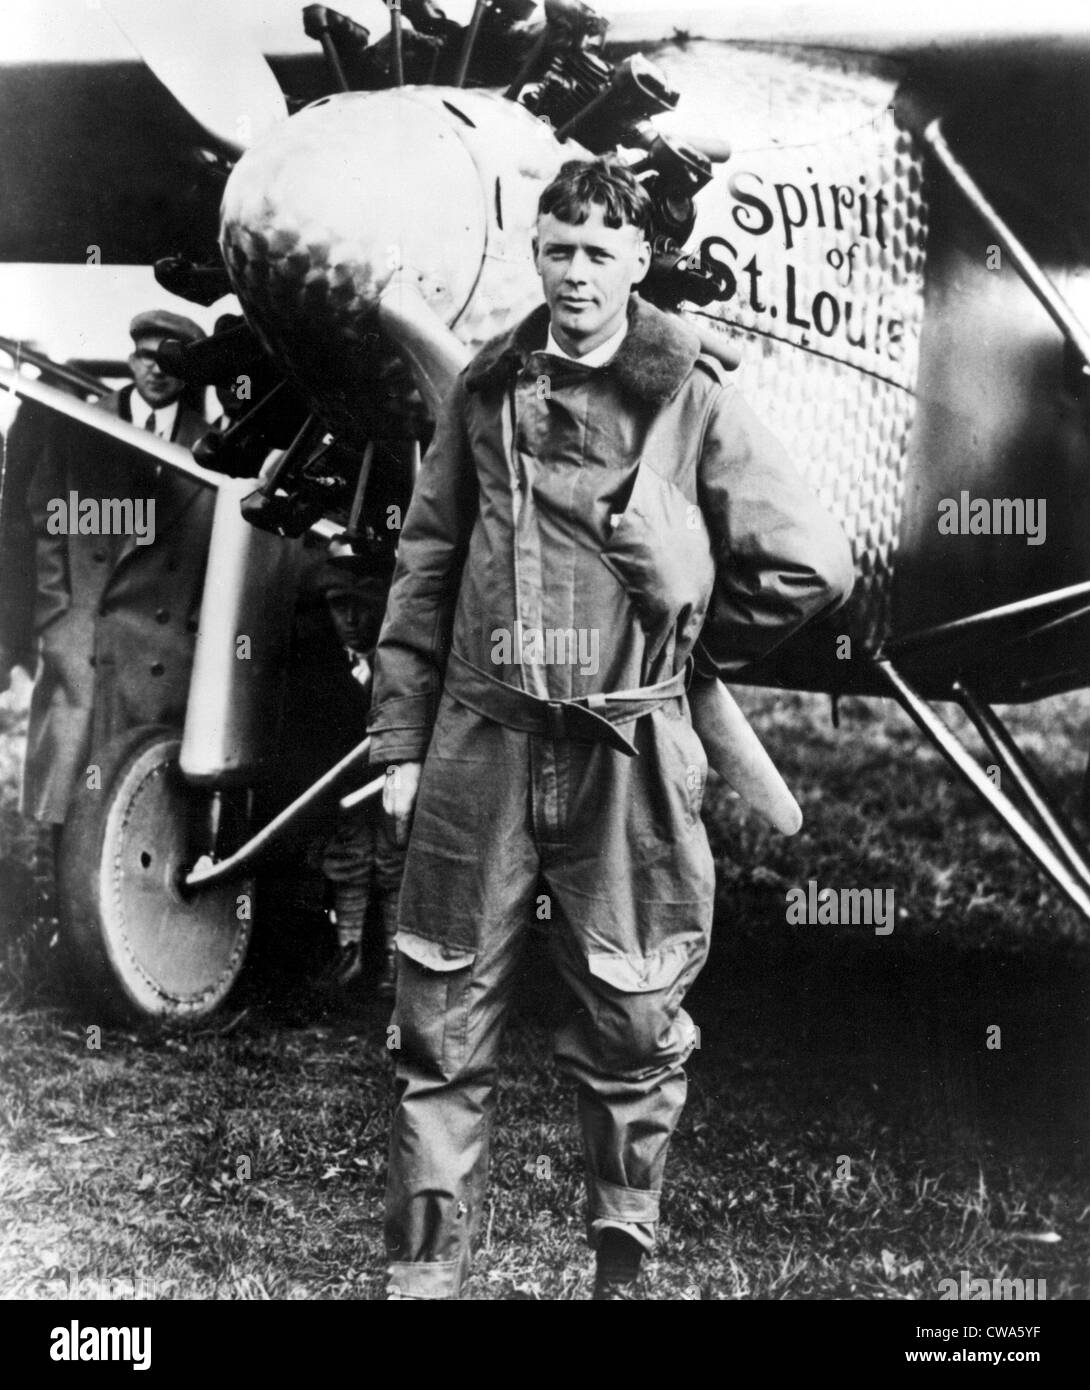 Charles Lindbergh at Curtiss Field, N.Y., in front of the Spitit of St. Louis.   CSU Archives Stock Photo